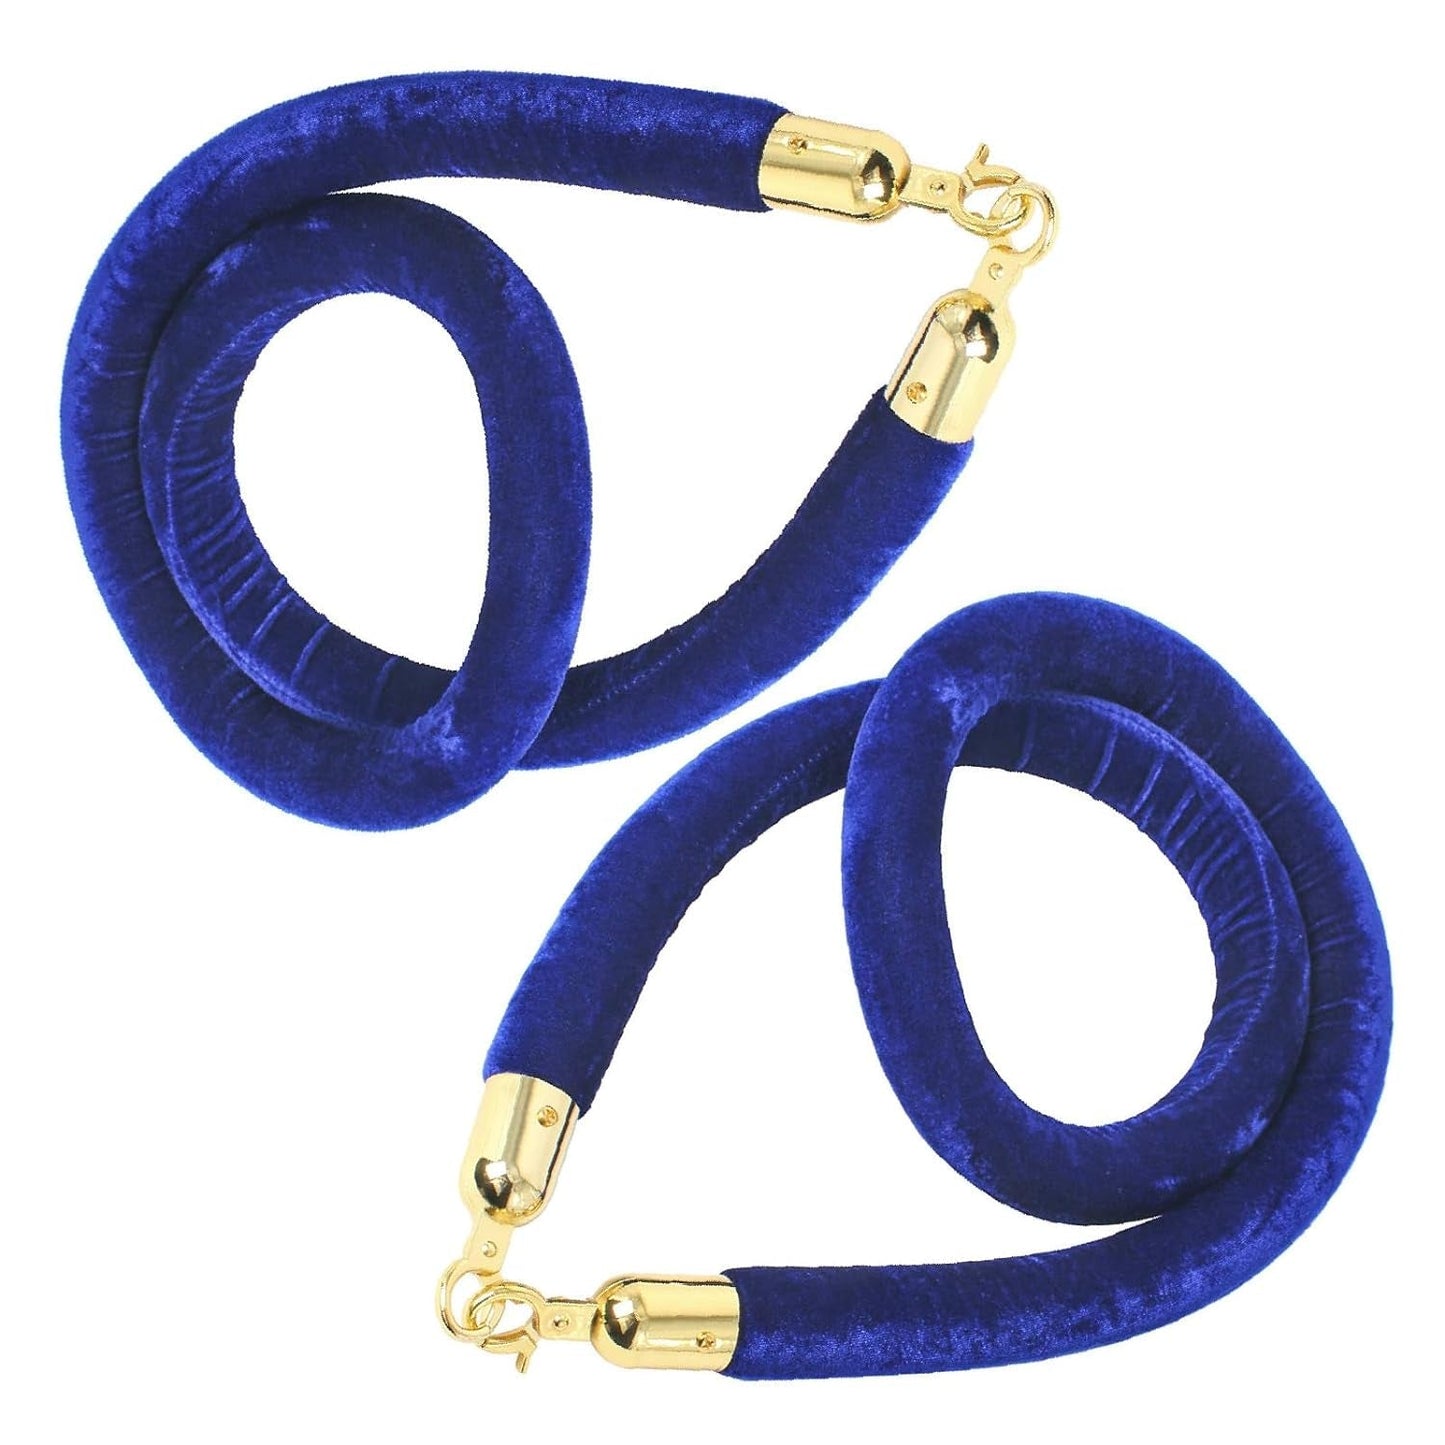 Novelbee 2Pcs Velvet Stanchion Ropes with Gold Hooks,10 Feet Stanchion Queue Barrier Ropes,Crowd Control Velvet Rope Safety Barriers for Party Decorations(Blue)